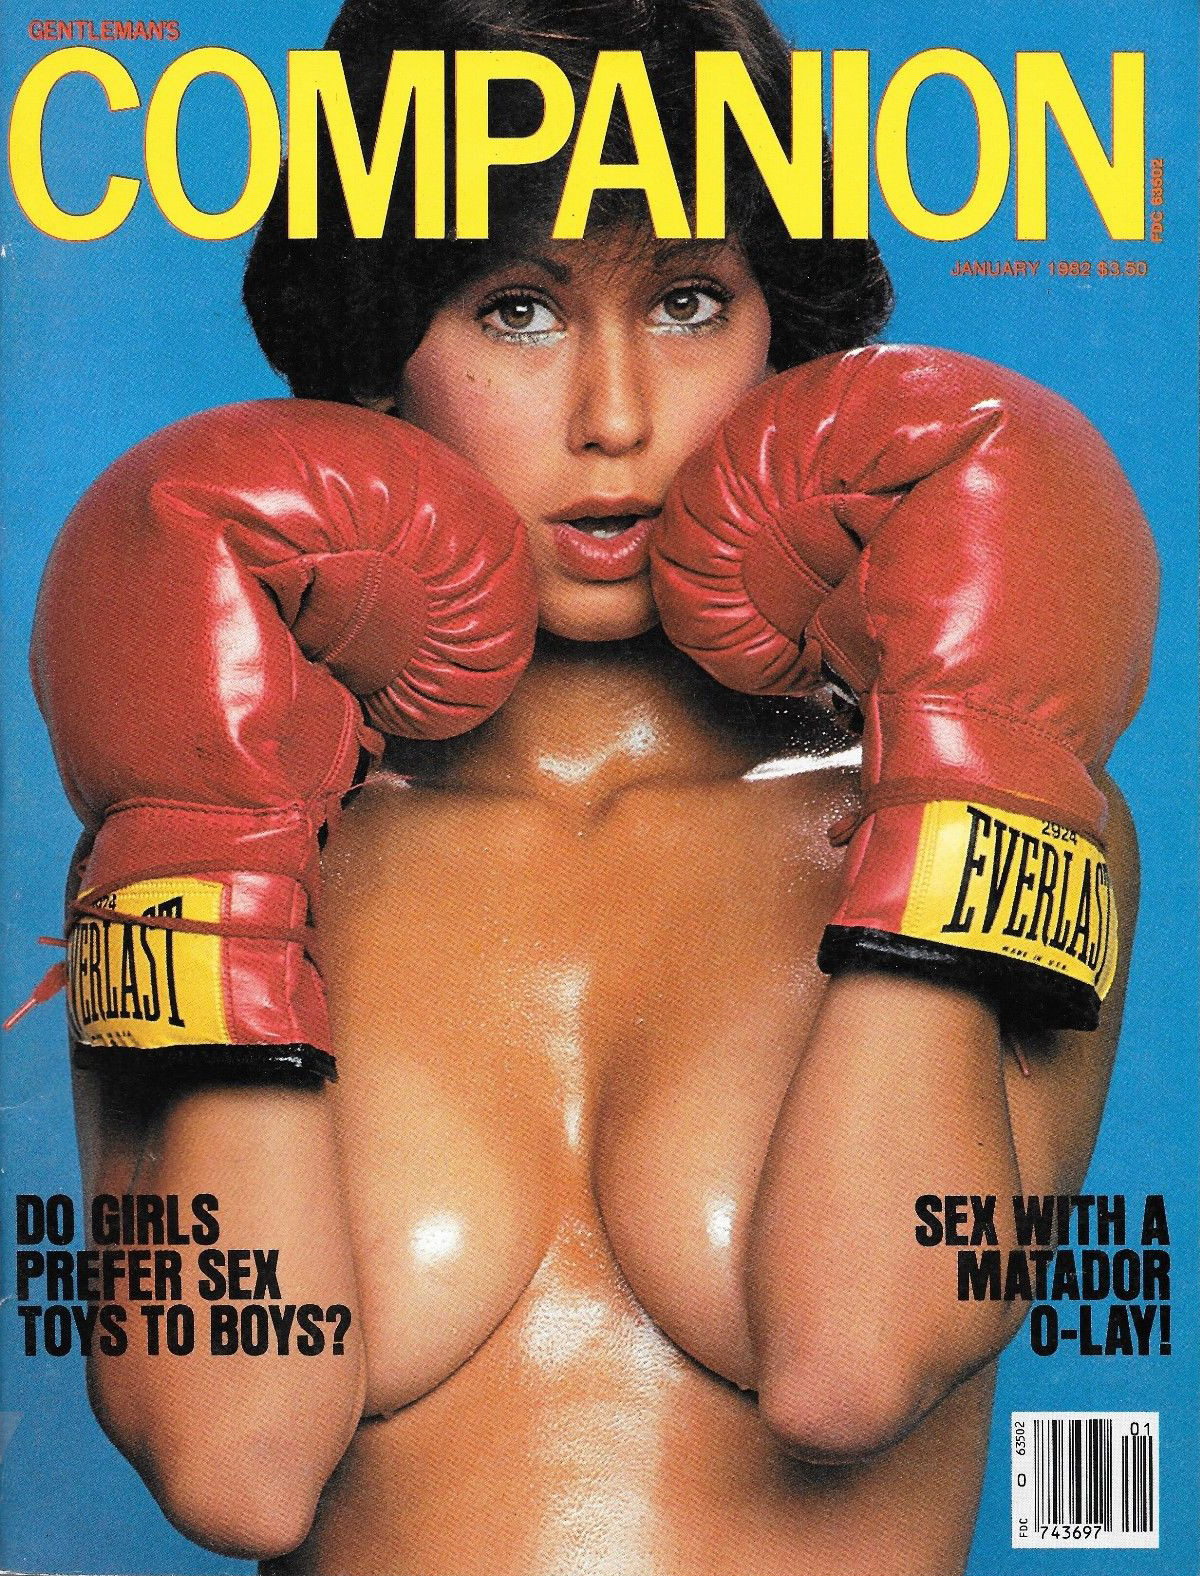 Gentleman's Companion January 1982 magazine back issue Gentleman's Companion magizine back copy Gentleman's Companion January 1982 Adult Pornographic Magazine Back Issue Published by LFP, Larry Flynt Publications. Do Girls Prefer Sex Toys To Boys?.